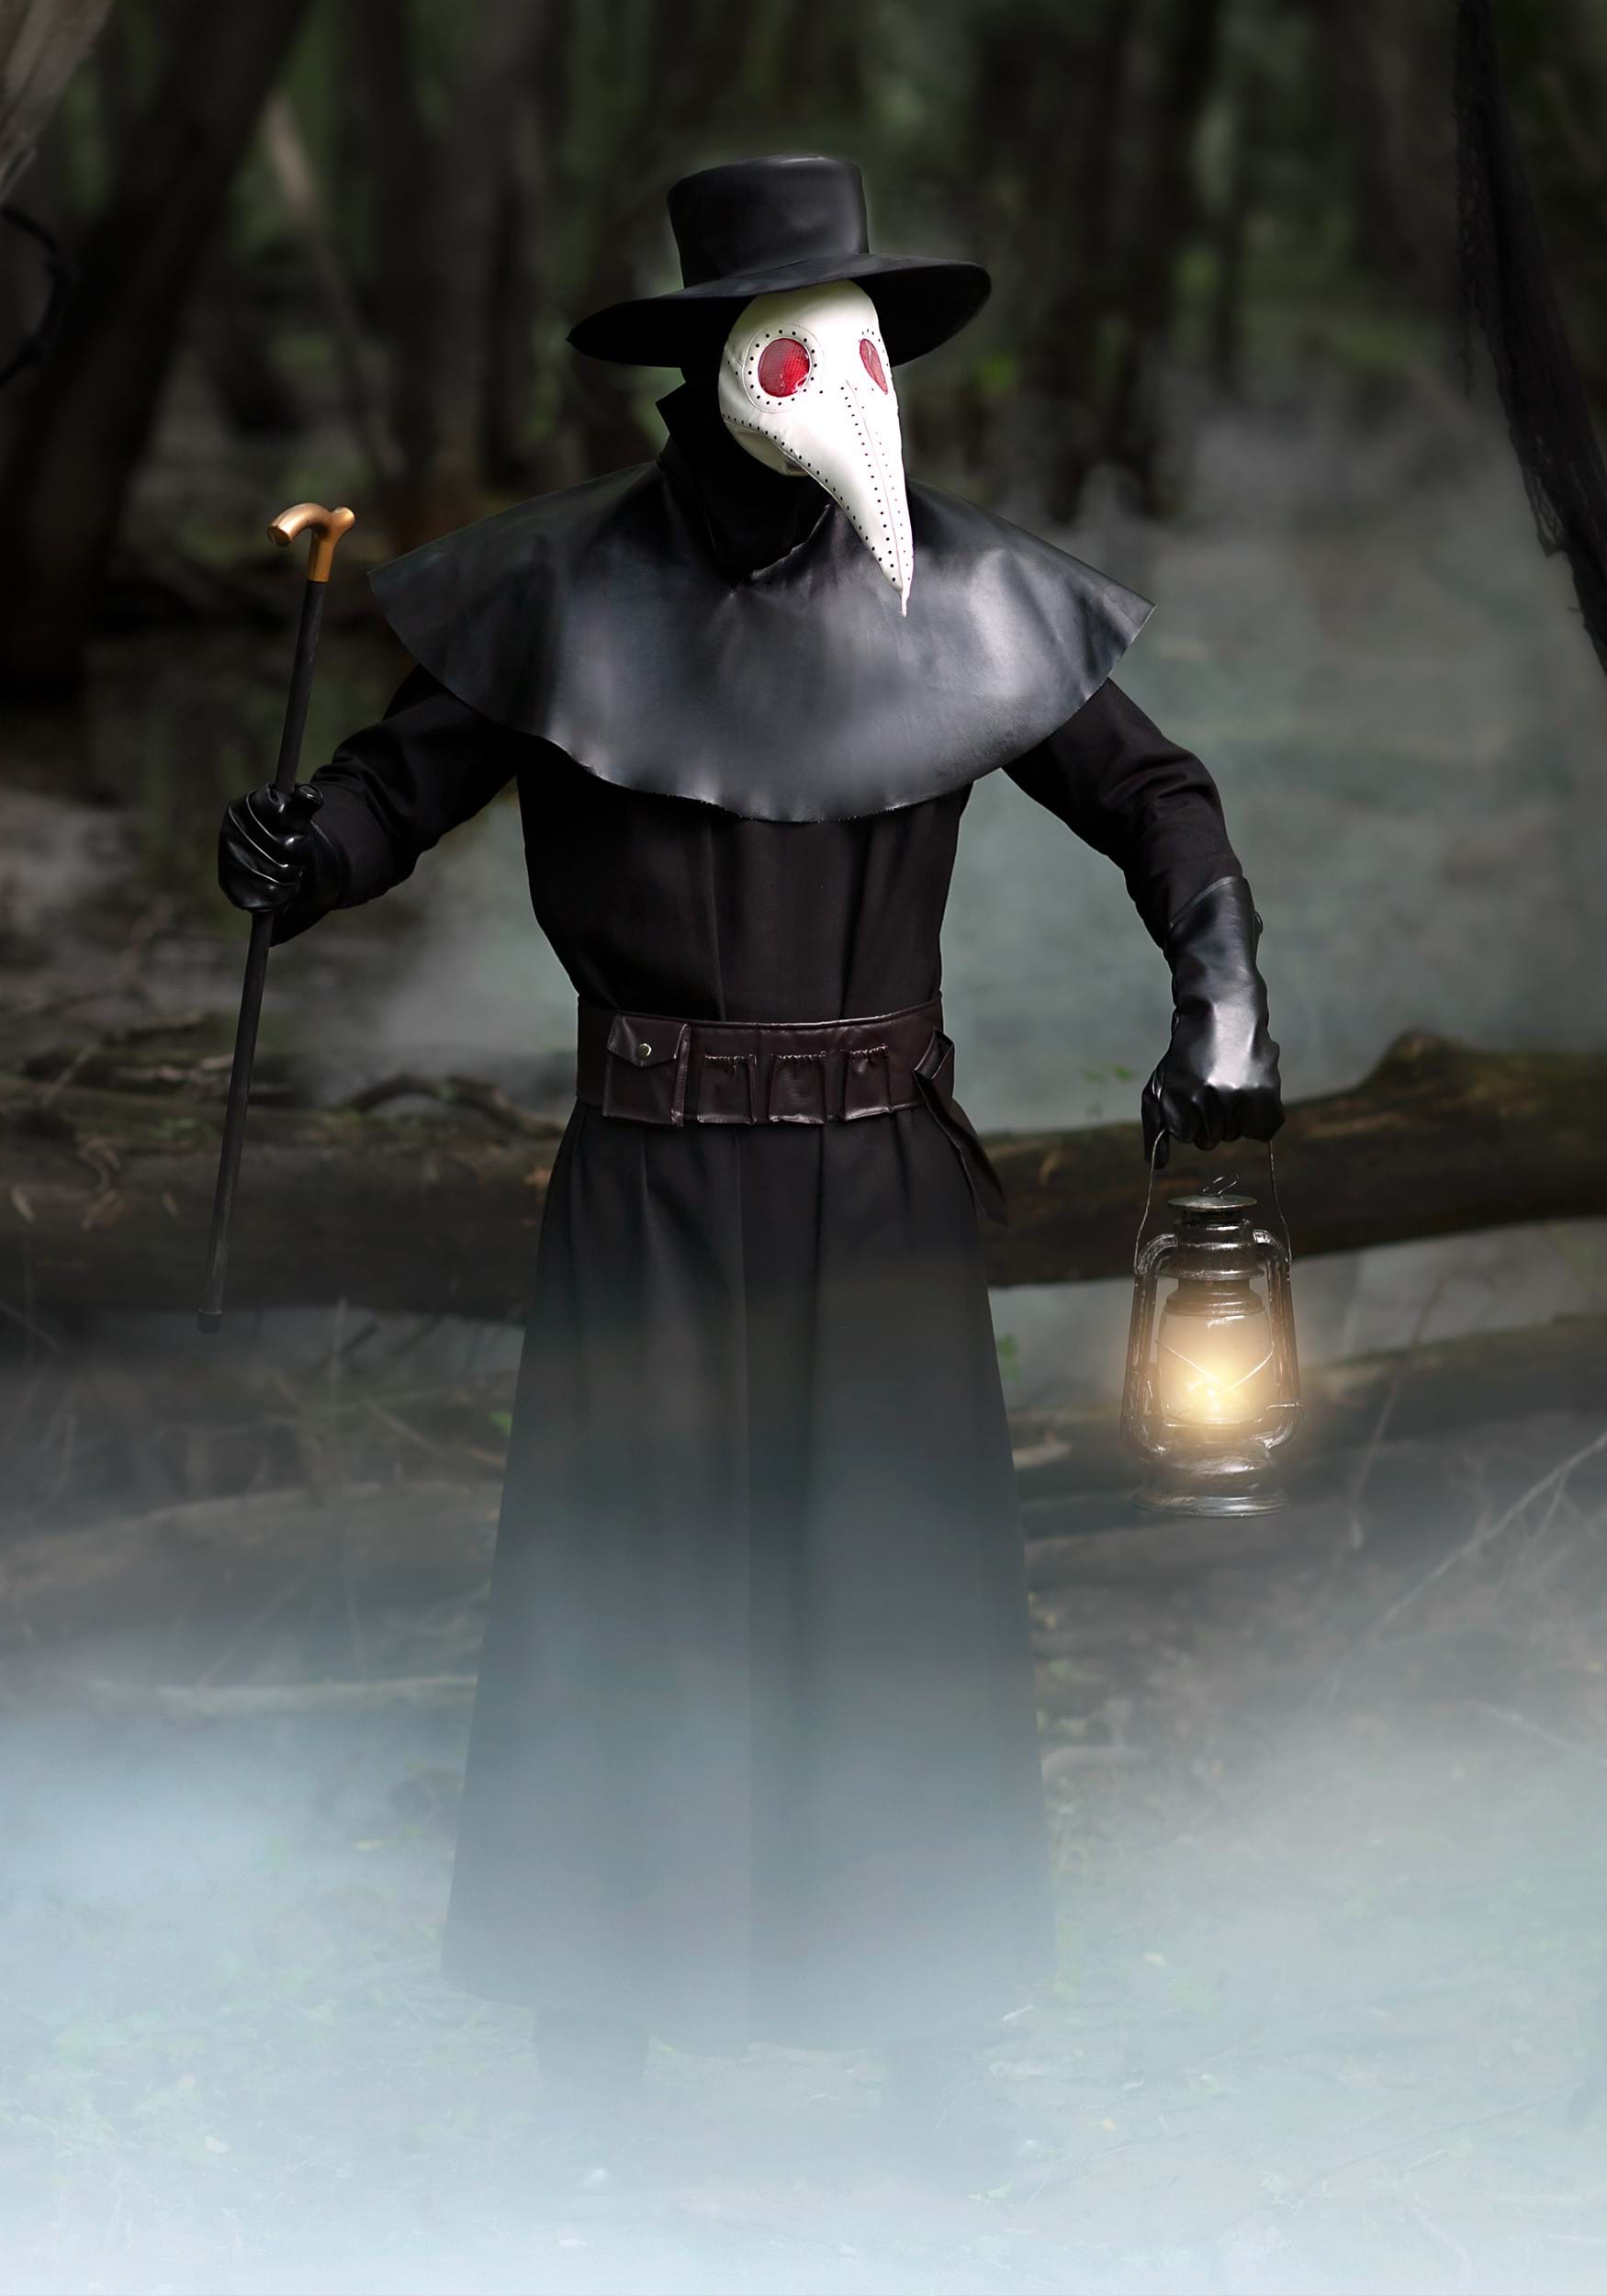 Plague Doctor Fancy Dress Costume For Adults , Historical Fancy Dress Costumes